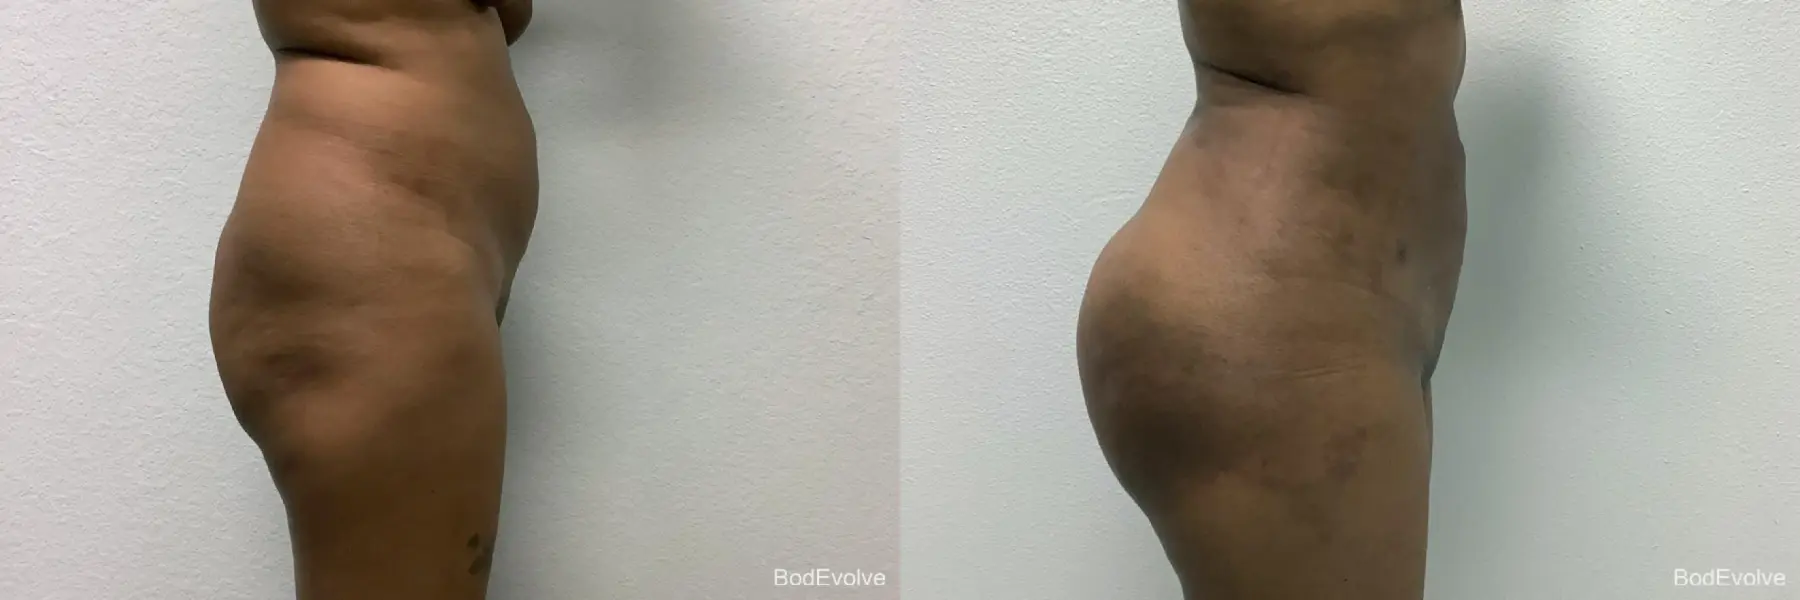 Brazilian Butt Lift: Patient 3 - Before and After 3